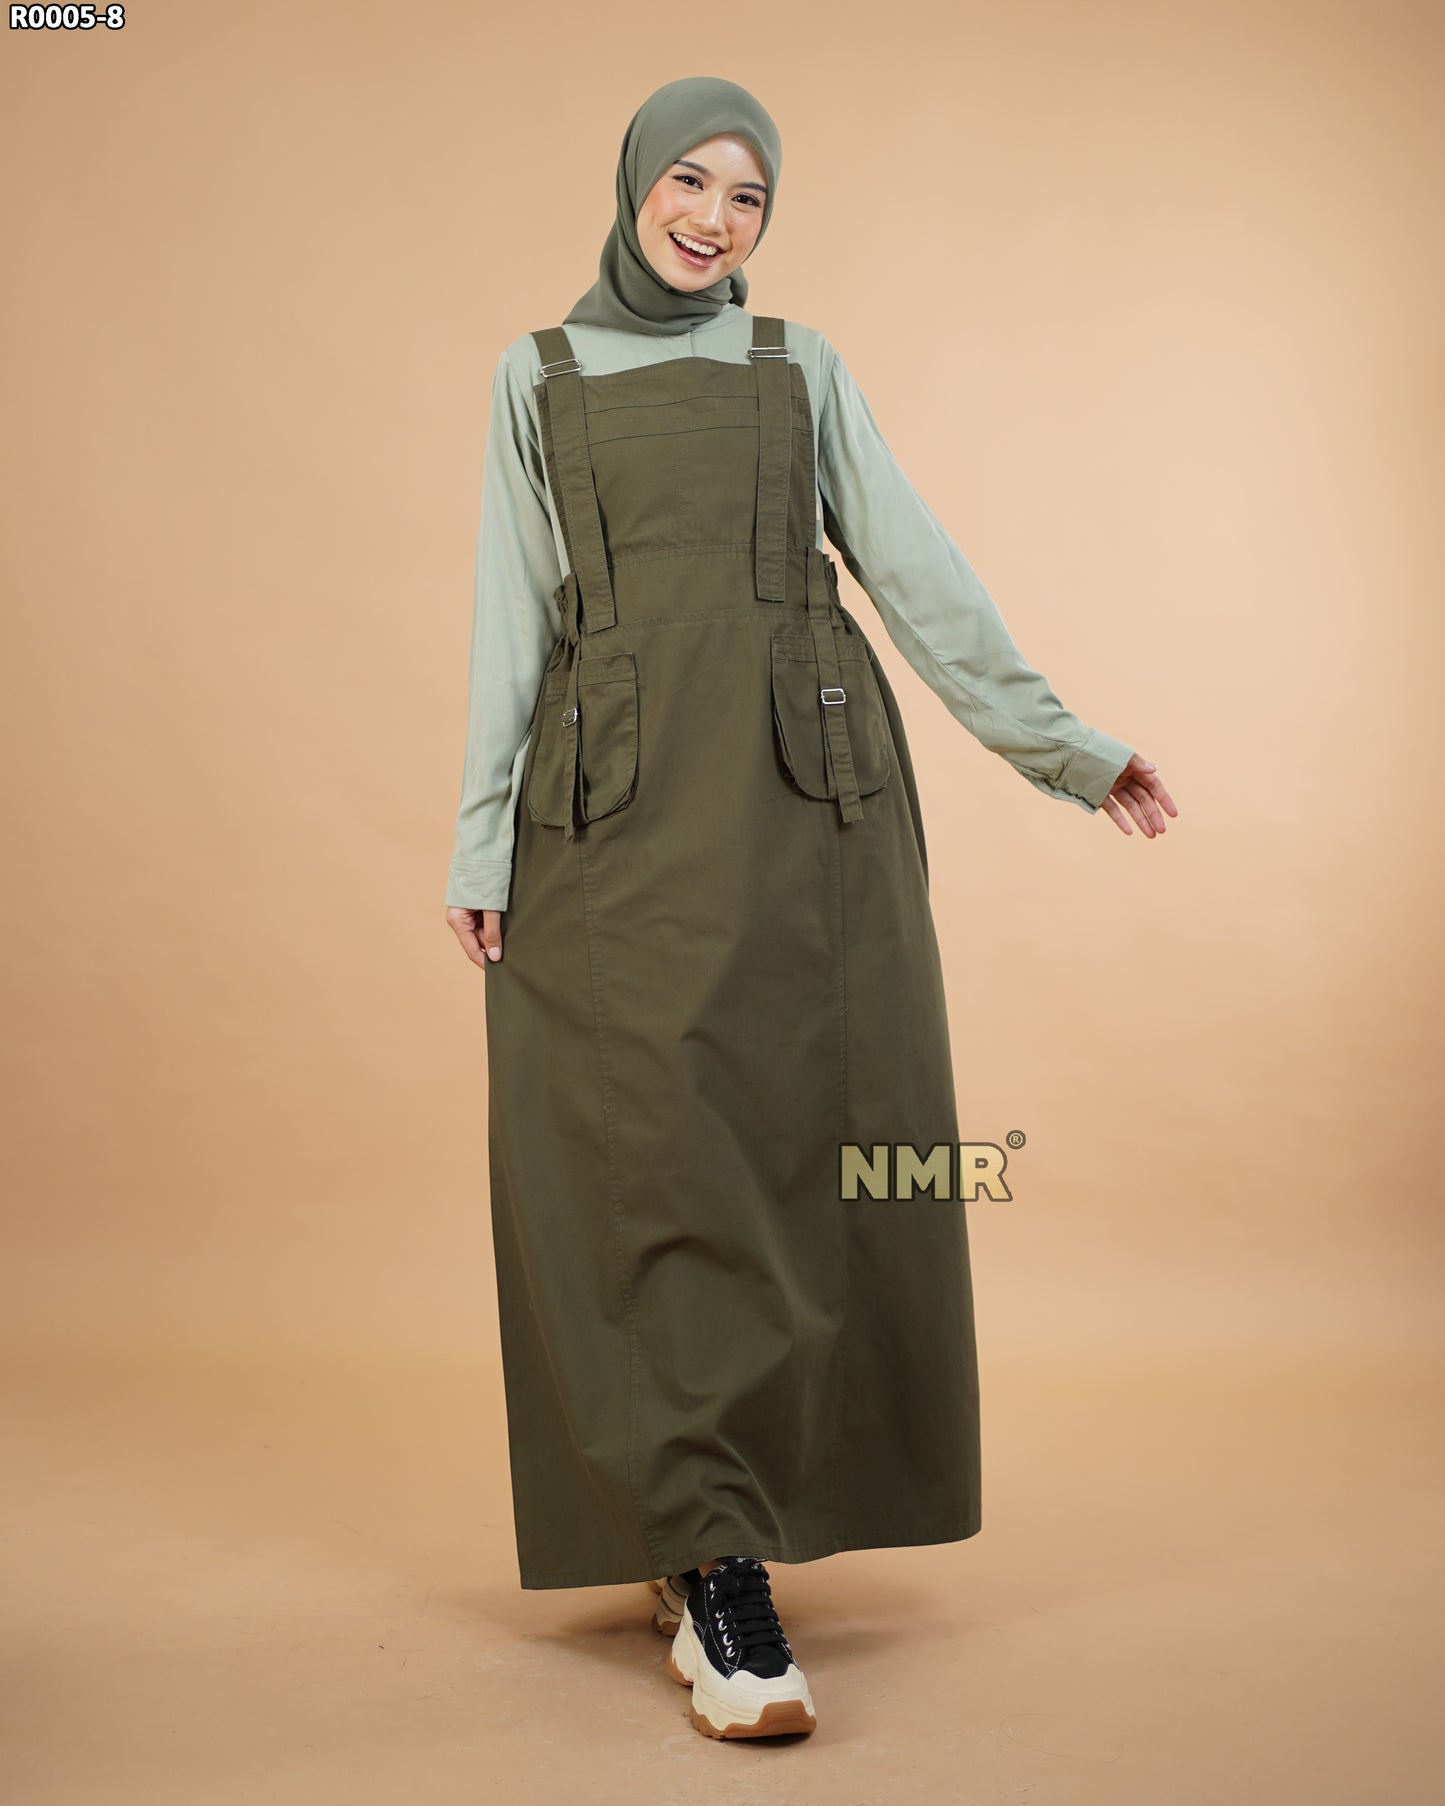 NMR Gamis Jumpsuit Overall Baby Canvas Vol R0005-8